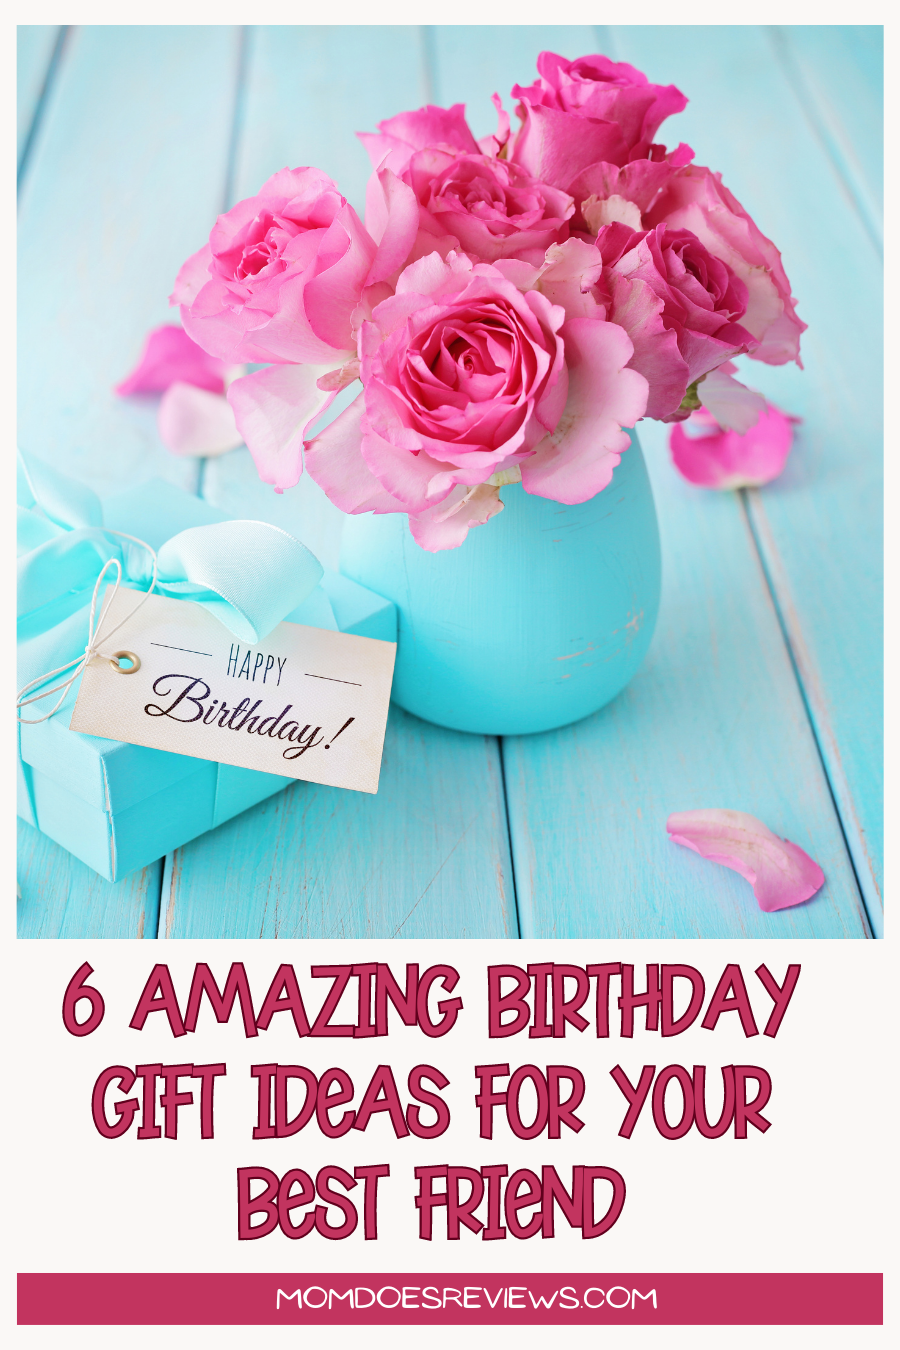 6 Amazing Birthday Gift Ideas for Your Best Friend